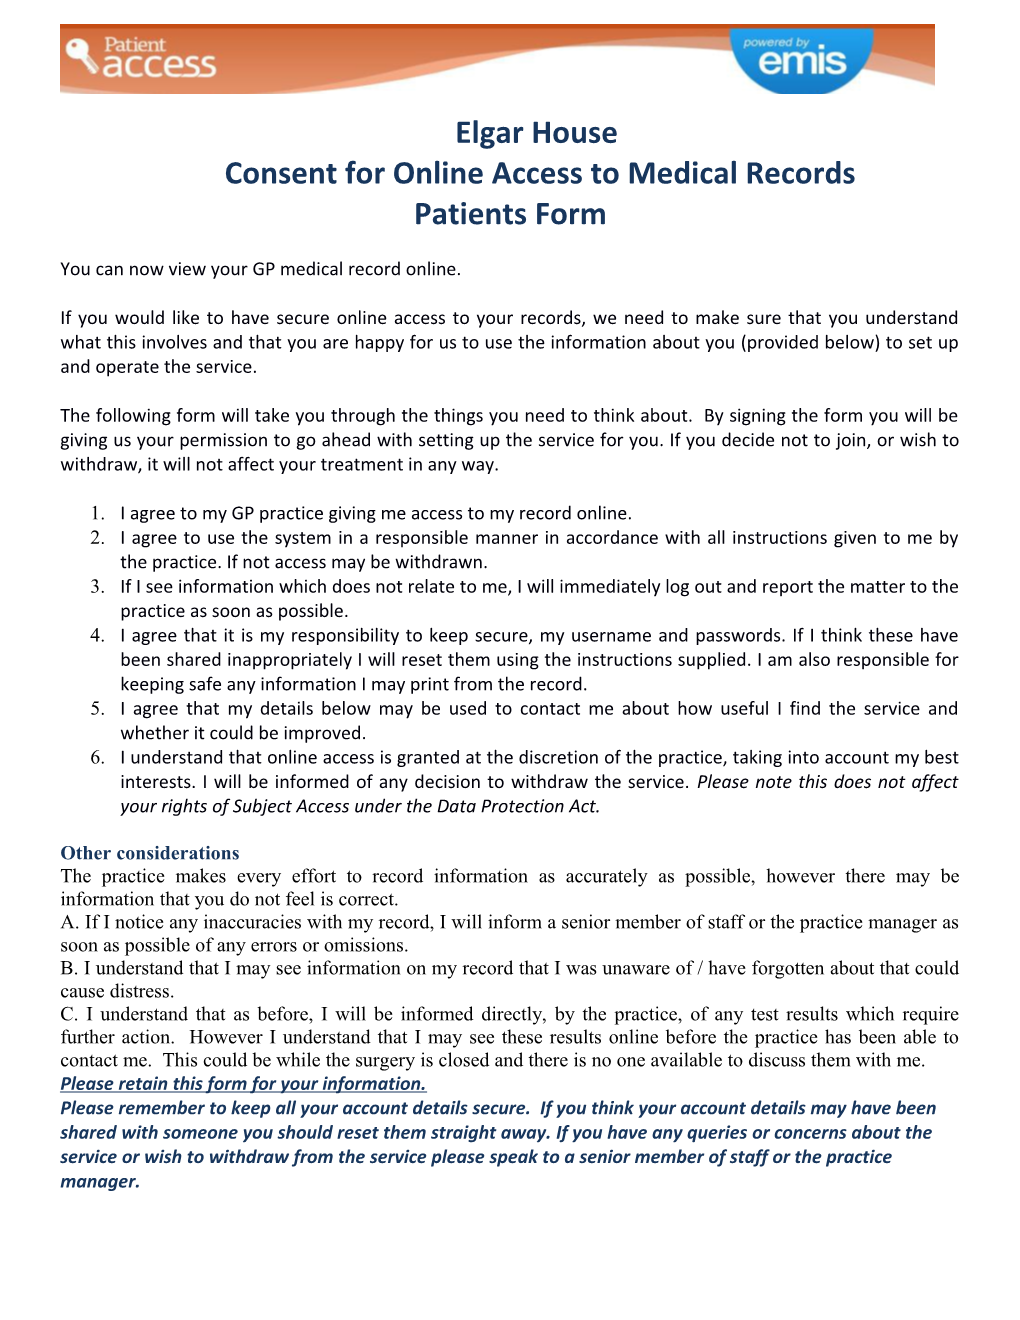 Consent for Online Access to Medical Records